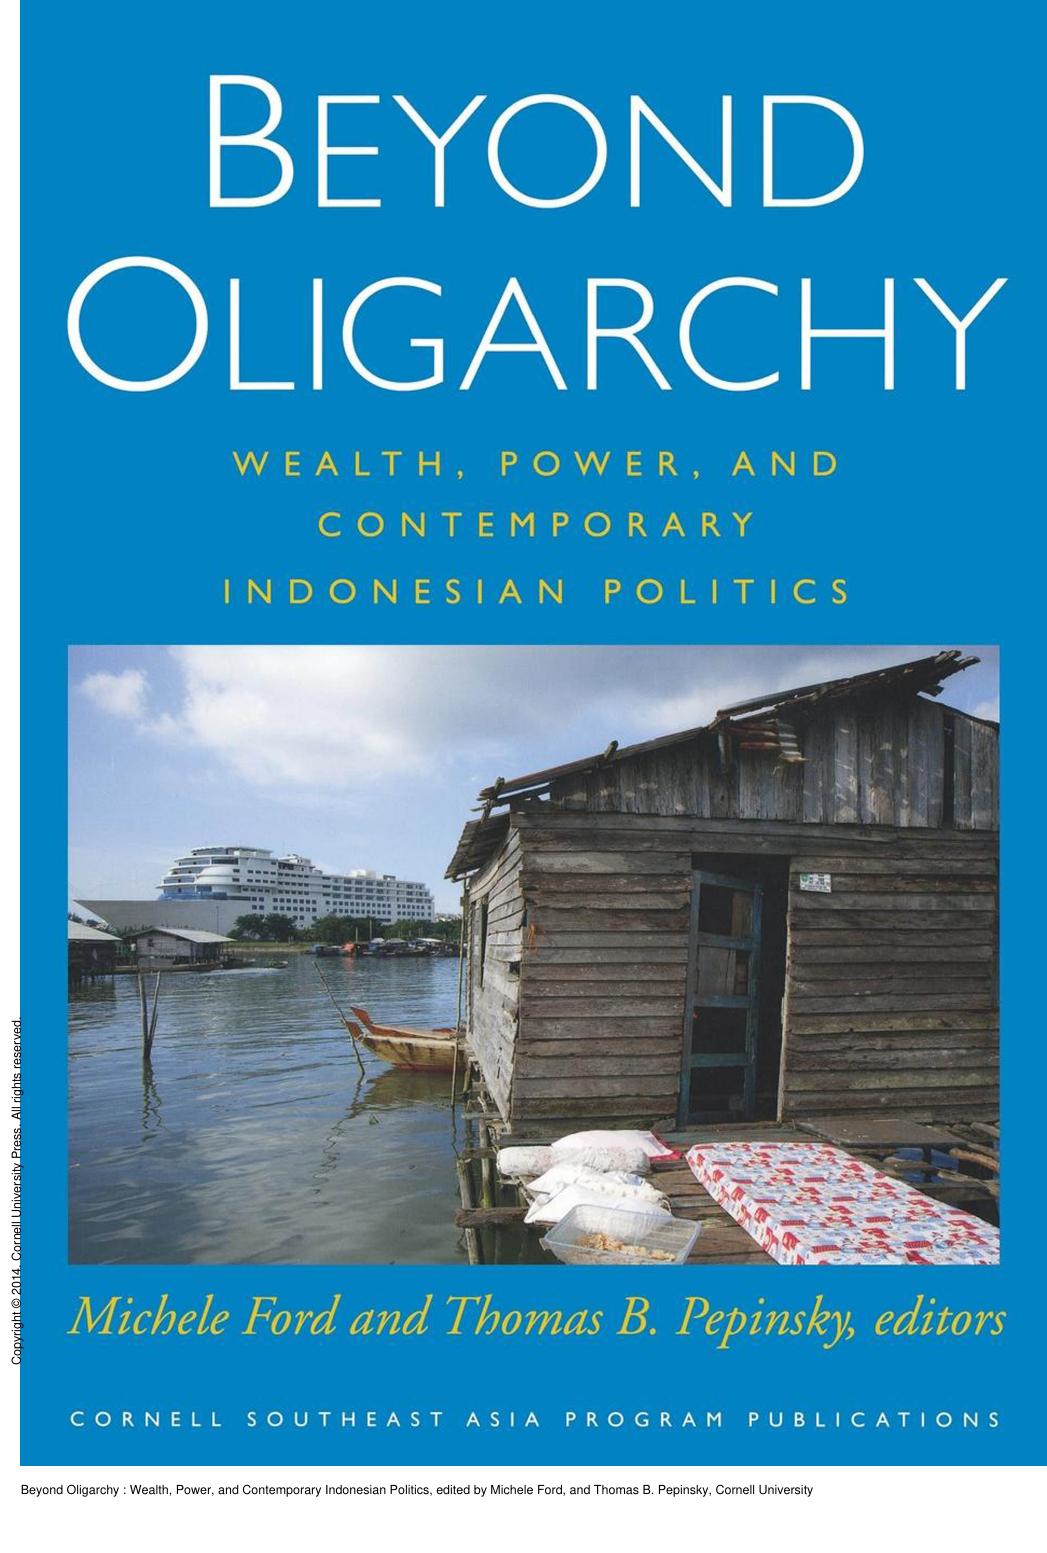 Beyond Oligarchy : Wealth, Power, and Contemporary Indonesian Politics by Michele Ford; Thomas B. Pepinsky